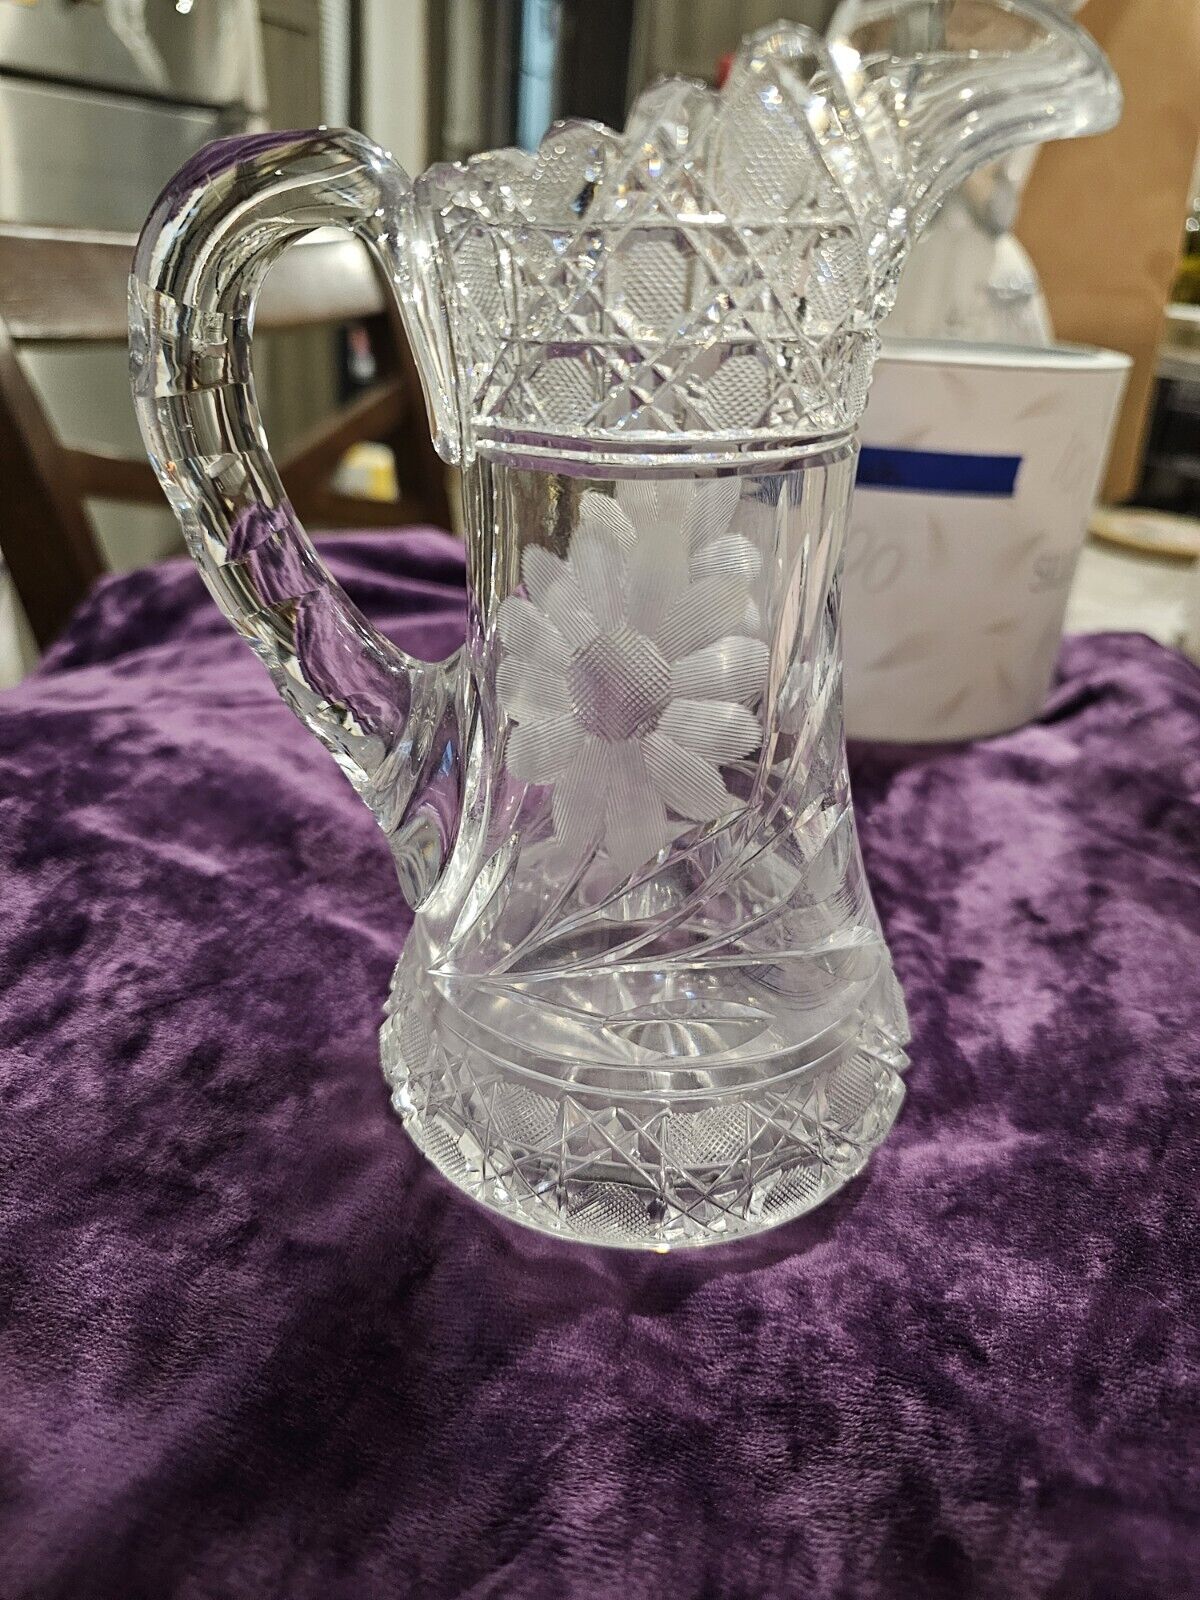 Vintage Etched Cut Glass Crystal Water Pitcher Daisy Design Floral Large